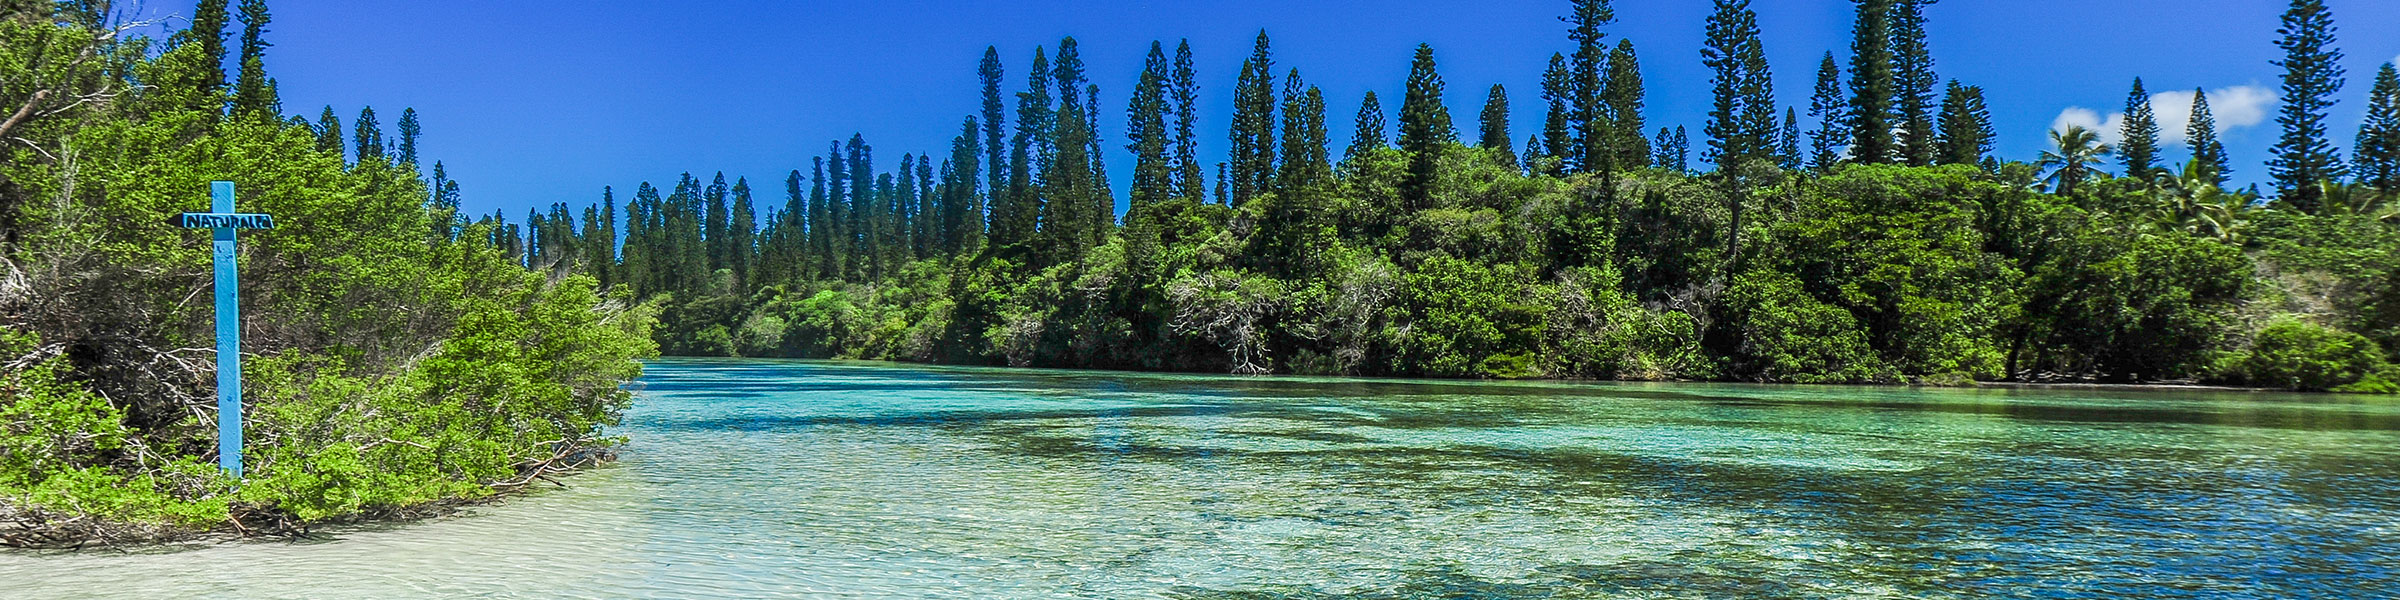 Île des Pins (Isle of Pines), New Caledonia